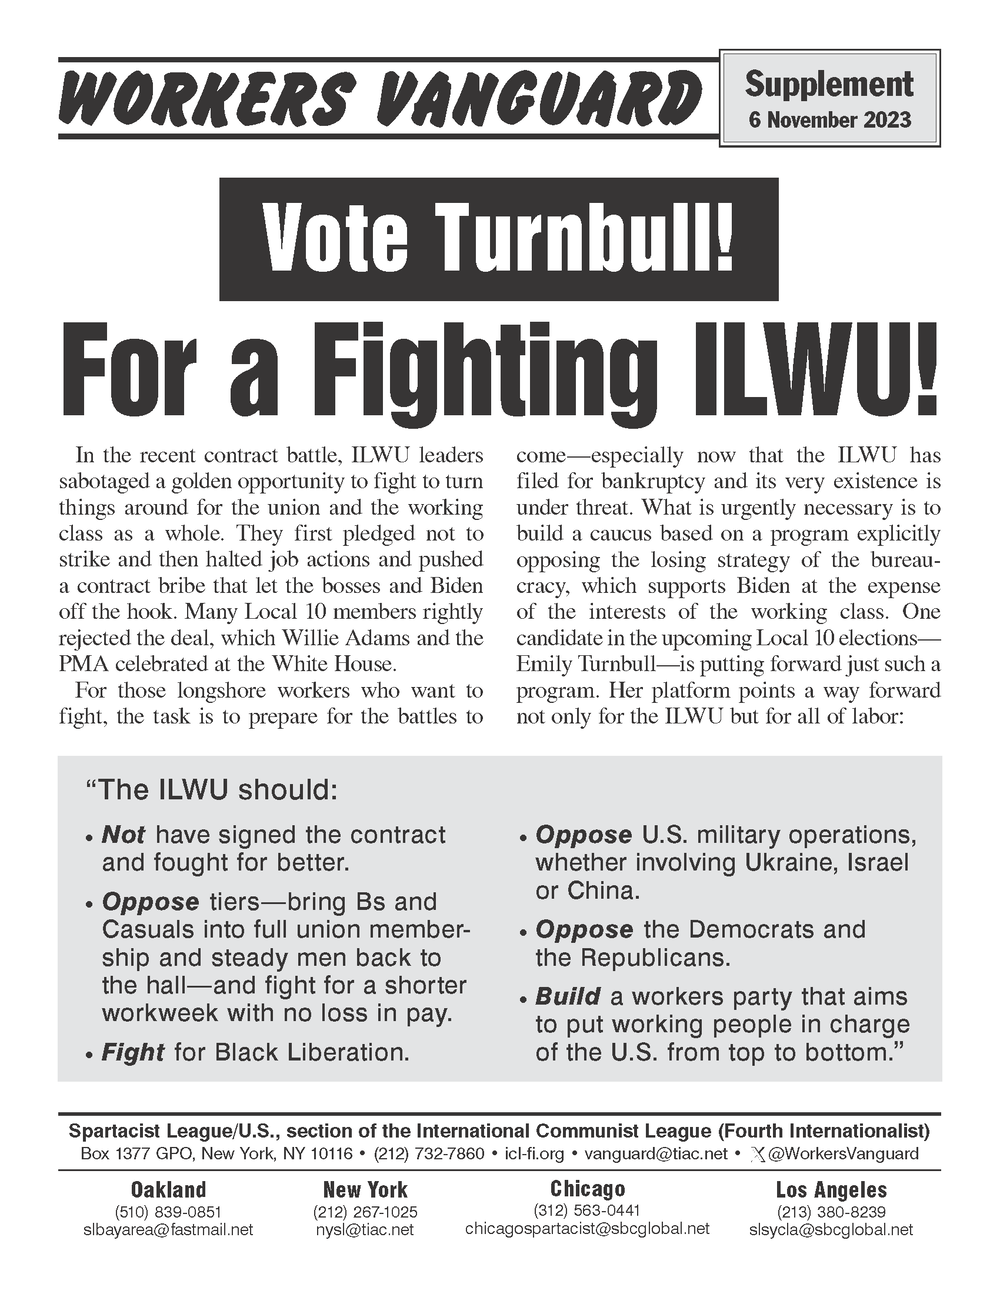 For a Fighting ILWU!  |  6 November 2023